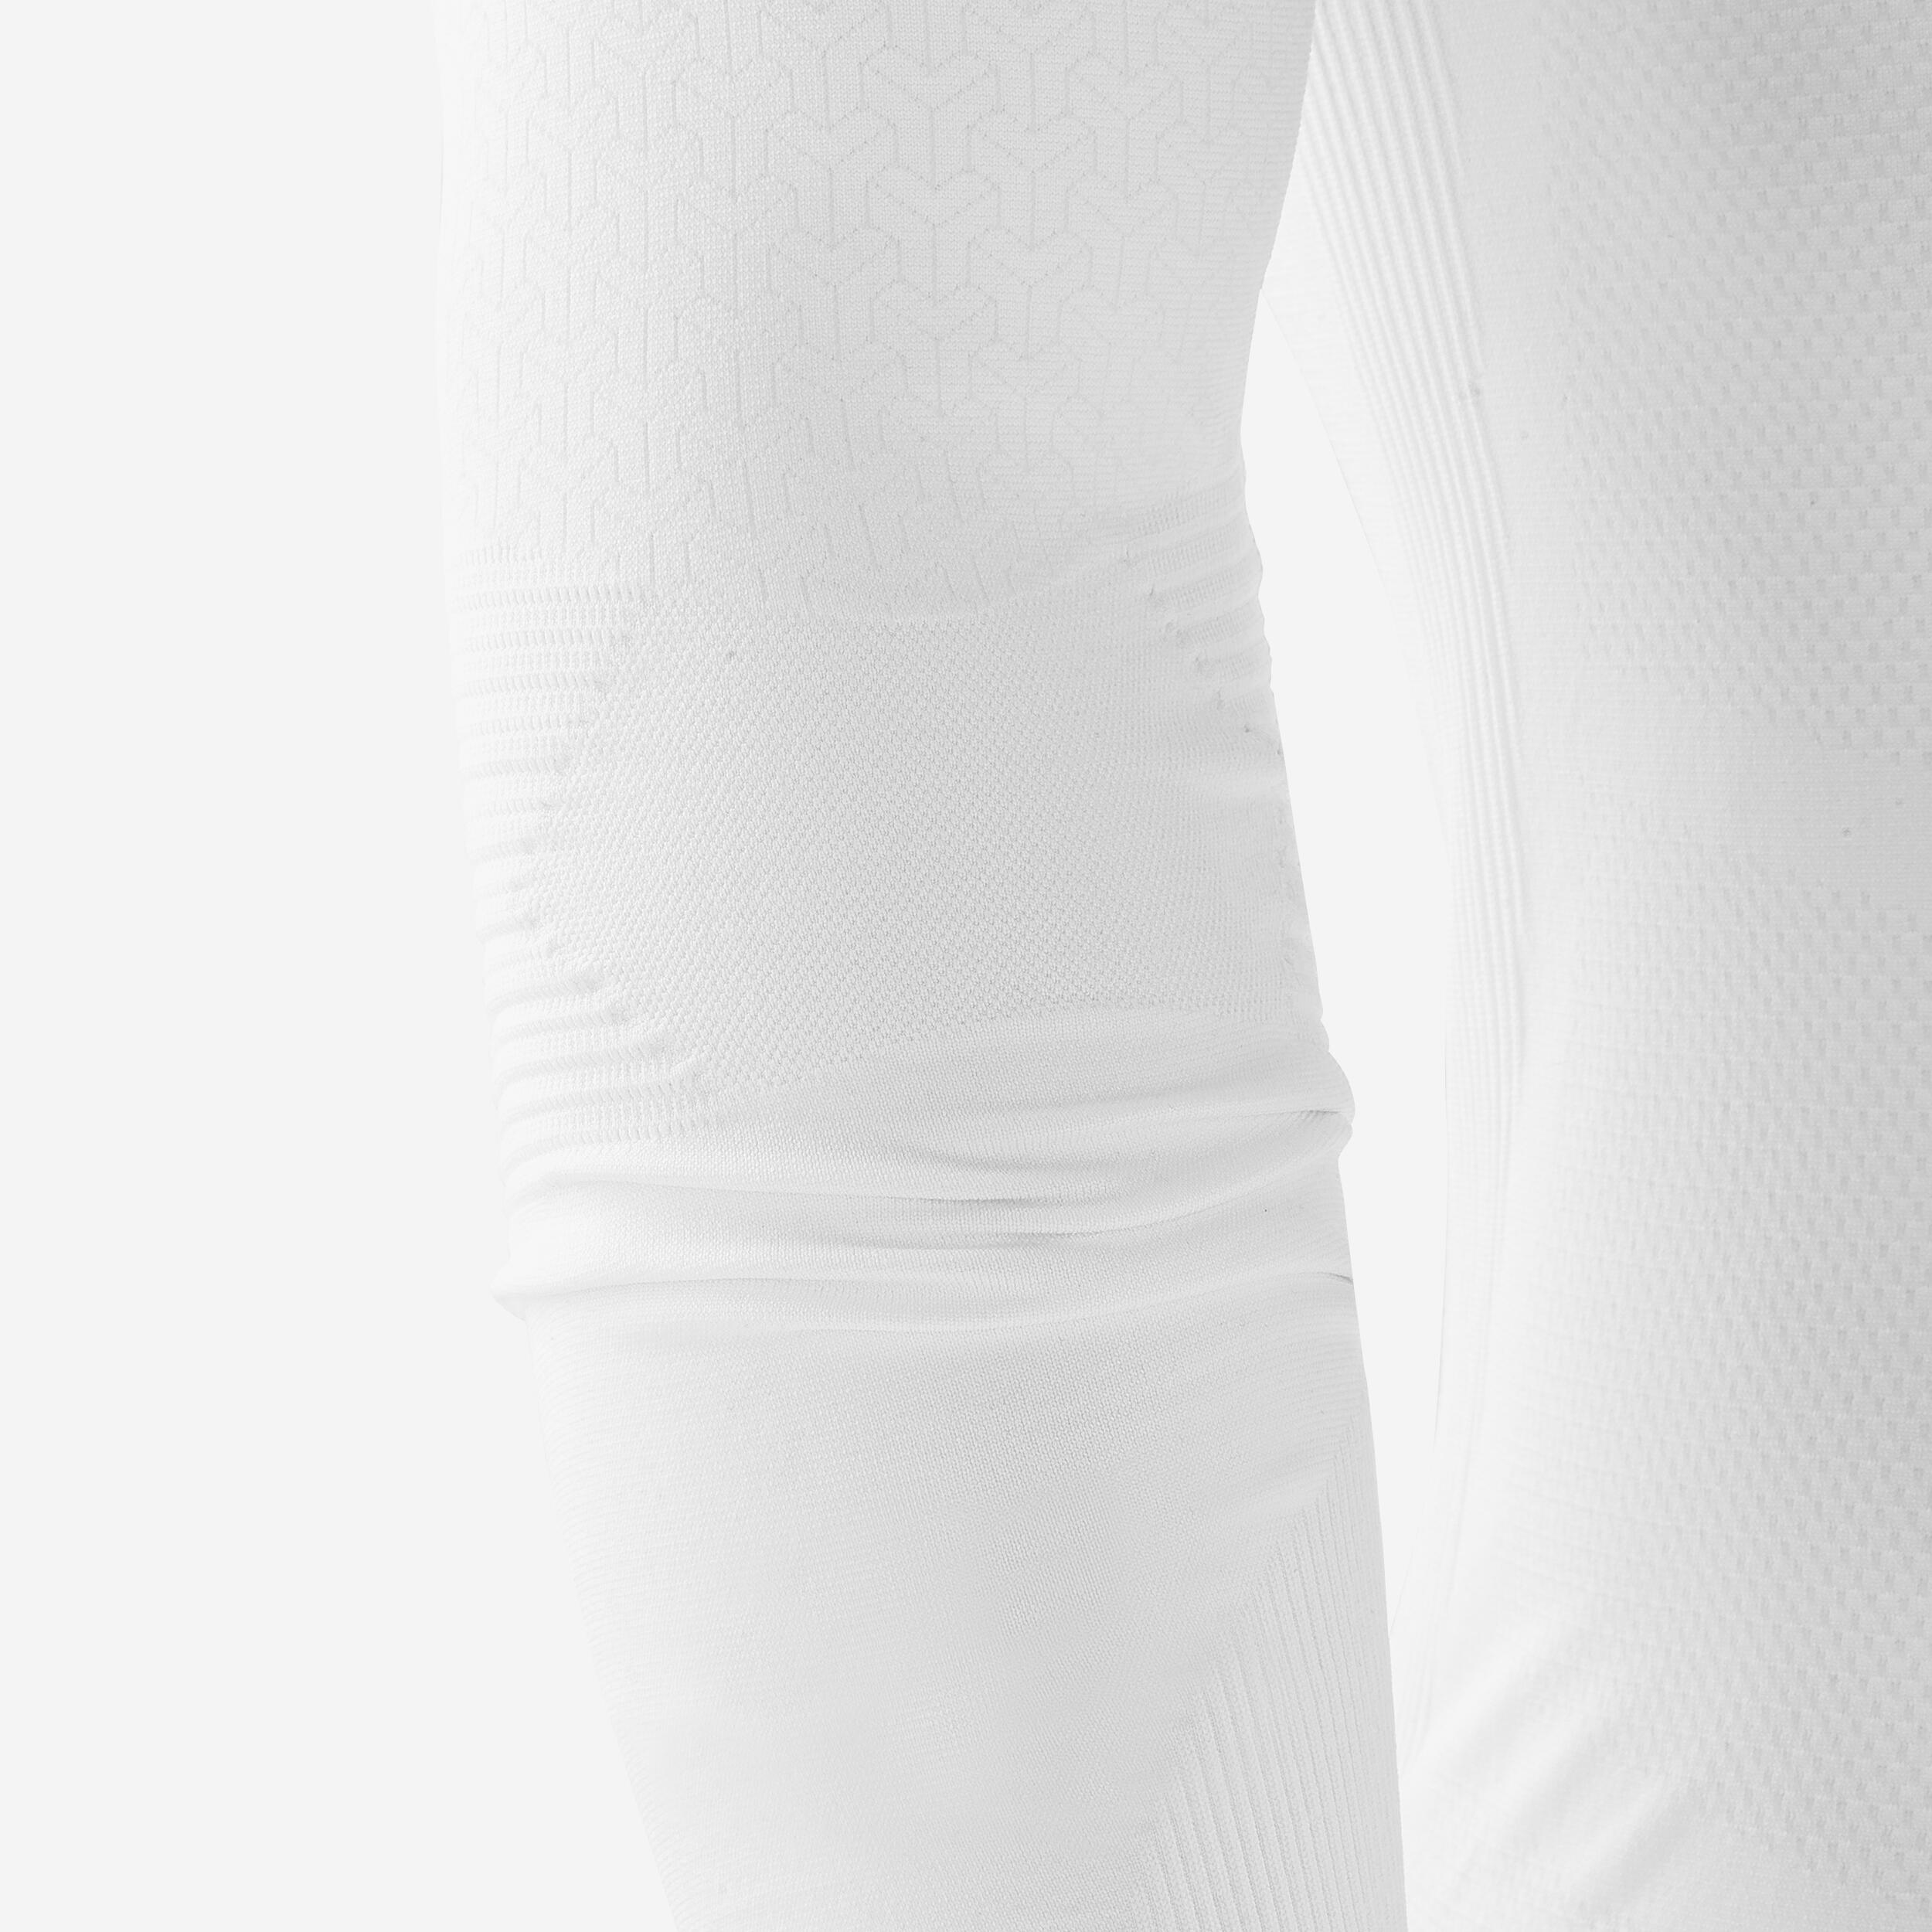 Adult Long-Sleeved Thermal Base Layer Top Keepdry 500 - White 12/13